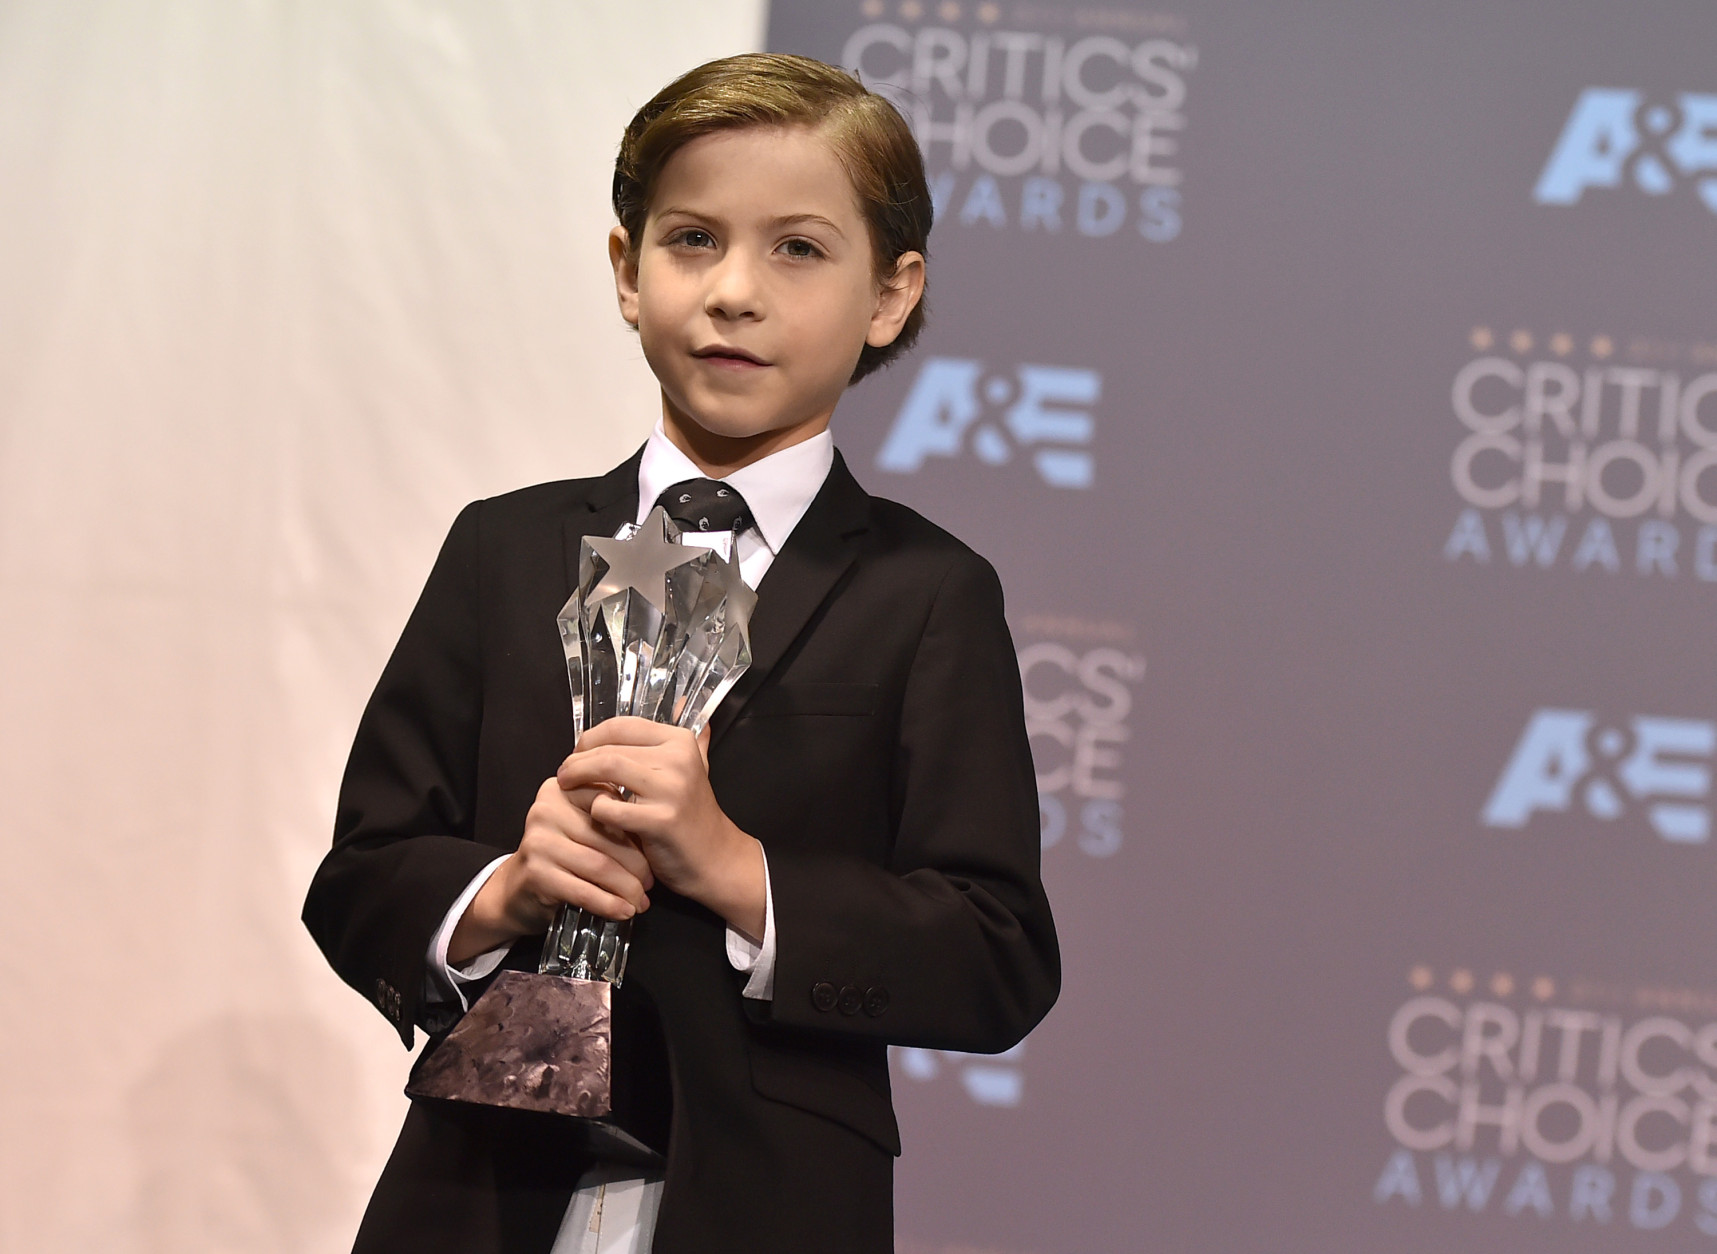 Jacob Tremblay poses in the press room with the award for best young actor/actress for Room at the 21st annual Critics' Choice Awards at the Barker Hangar on Sunday, Jan. 17, 2016, in Santa Monica, Calif. (Photo by Jordan Strauss/Invision/AP)